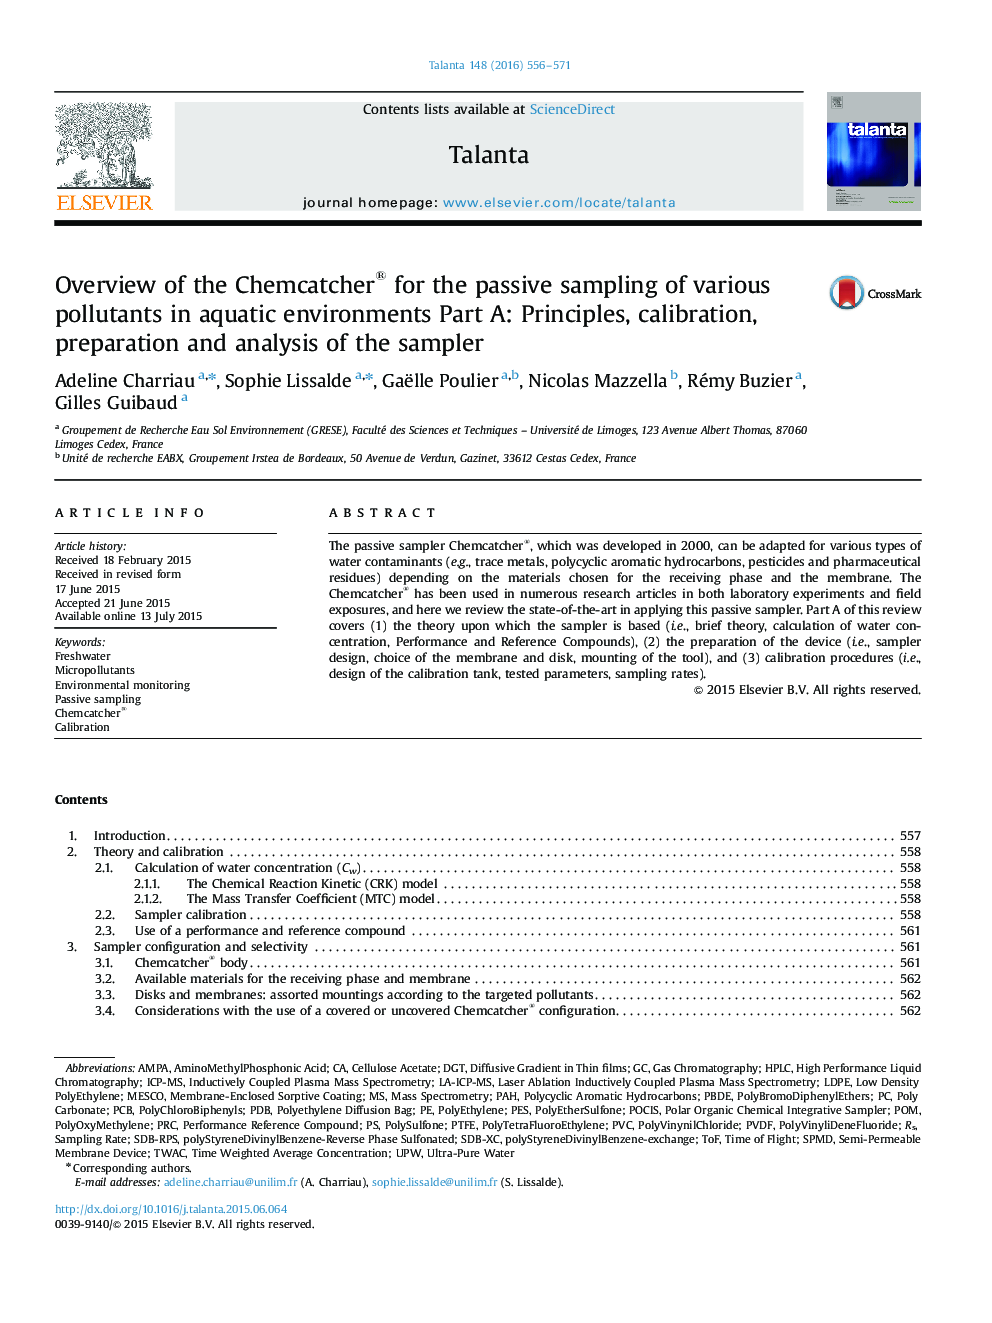 Overview of the Chemcatcher® for the passive sampling of various pollutants in aquatic environments Part A: Principles, calibration, preparation and analysis of the sampler